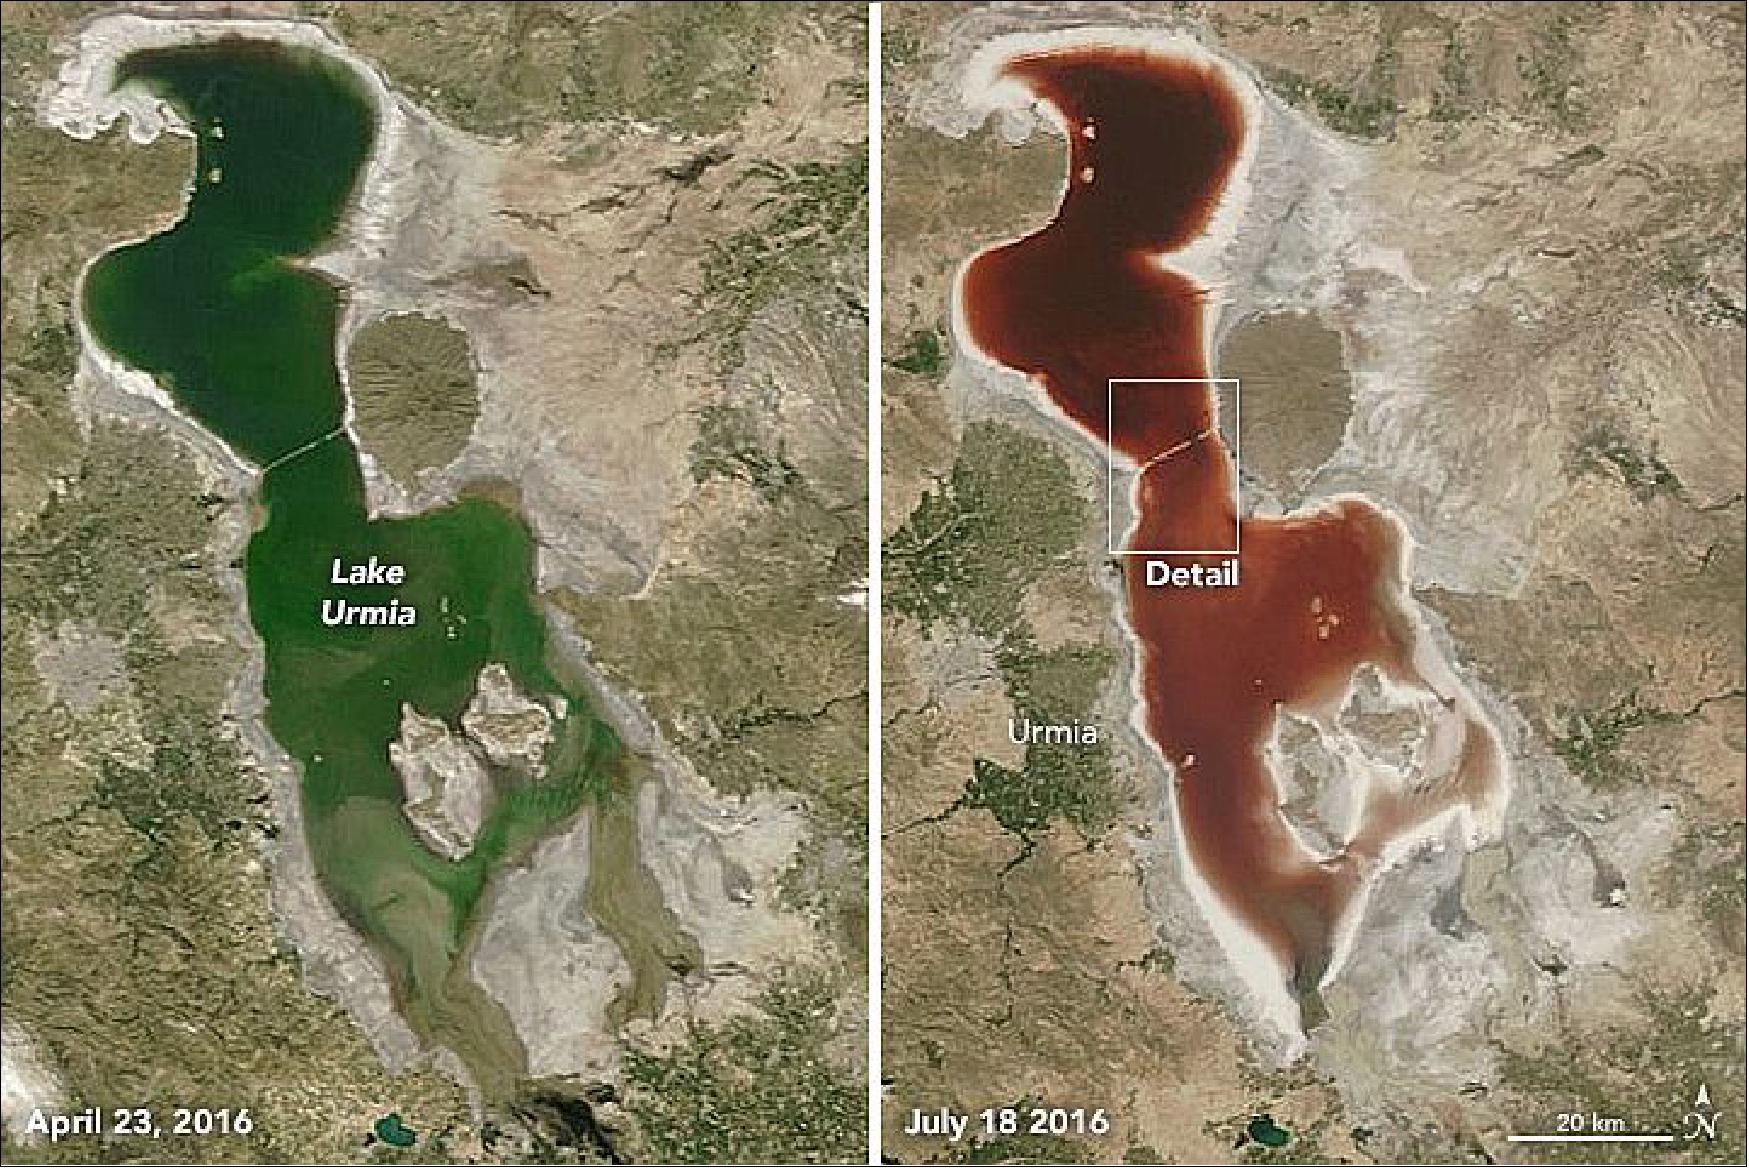 Figure 118: The MODIS instrument on Aqua recently captured a transition in the color of Lake Urmia between April and July 2016. On April 23, (left image) the water was green; by July 18, it was the color of wine. The shoreline is encrusted with salt deposits and appears white. Note that the ring of salt is especially noticeable in July, when water levels were lower (image credit: NASA Earth Observatory, images by Joshua Stevens)